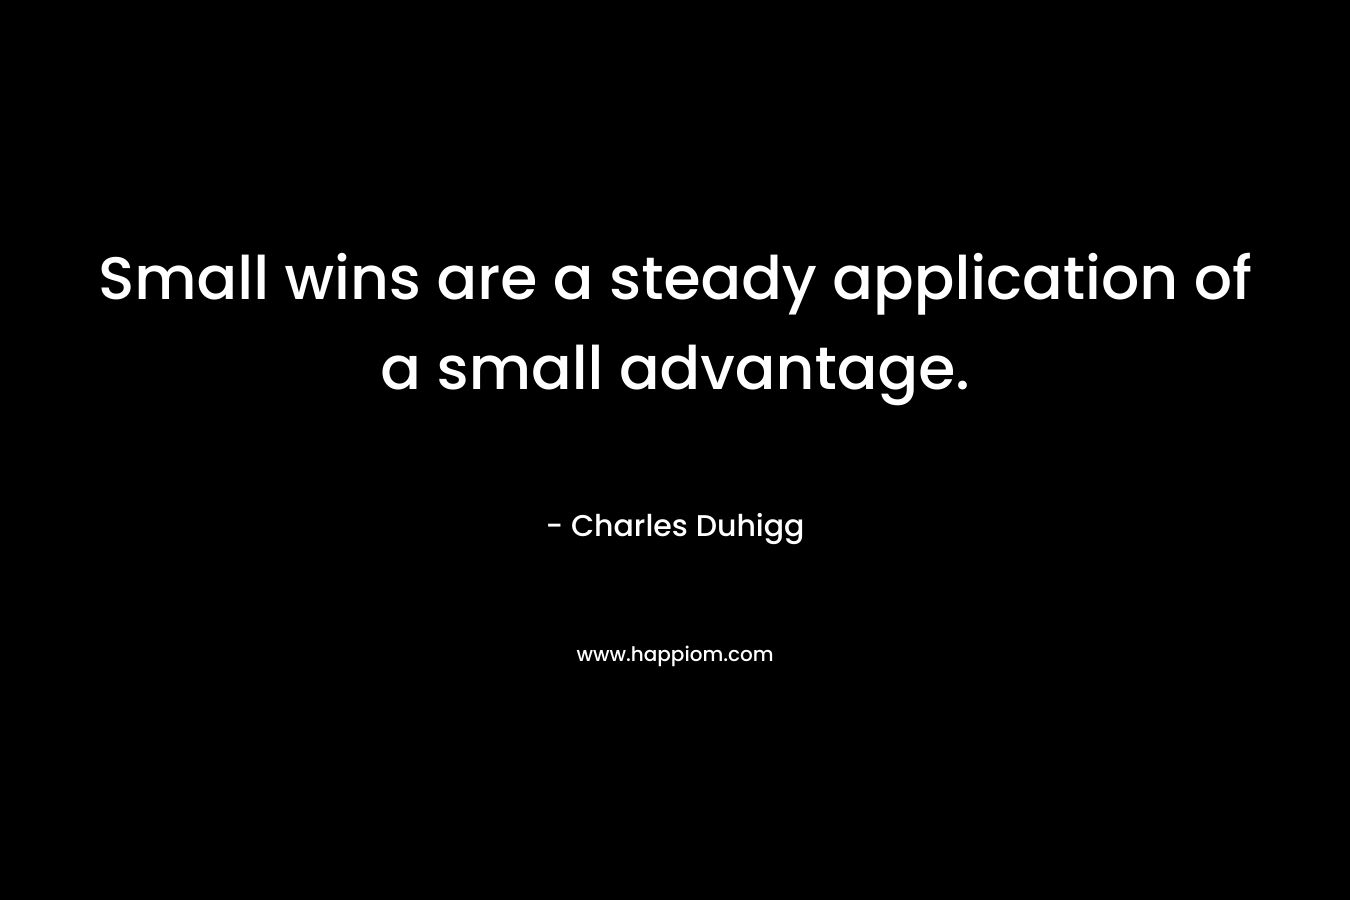 Small wins are a steady application of a small advantage. – Charles Duhigg